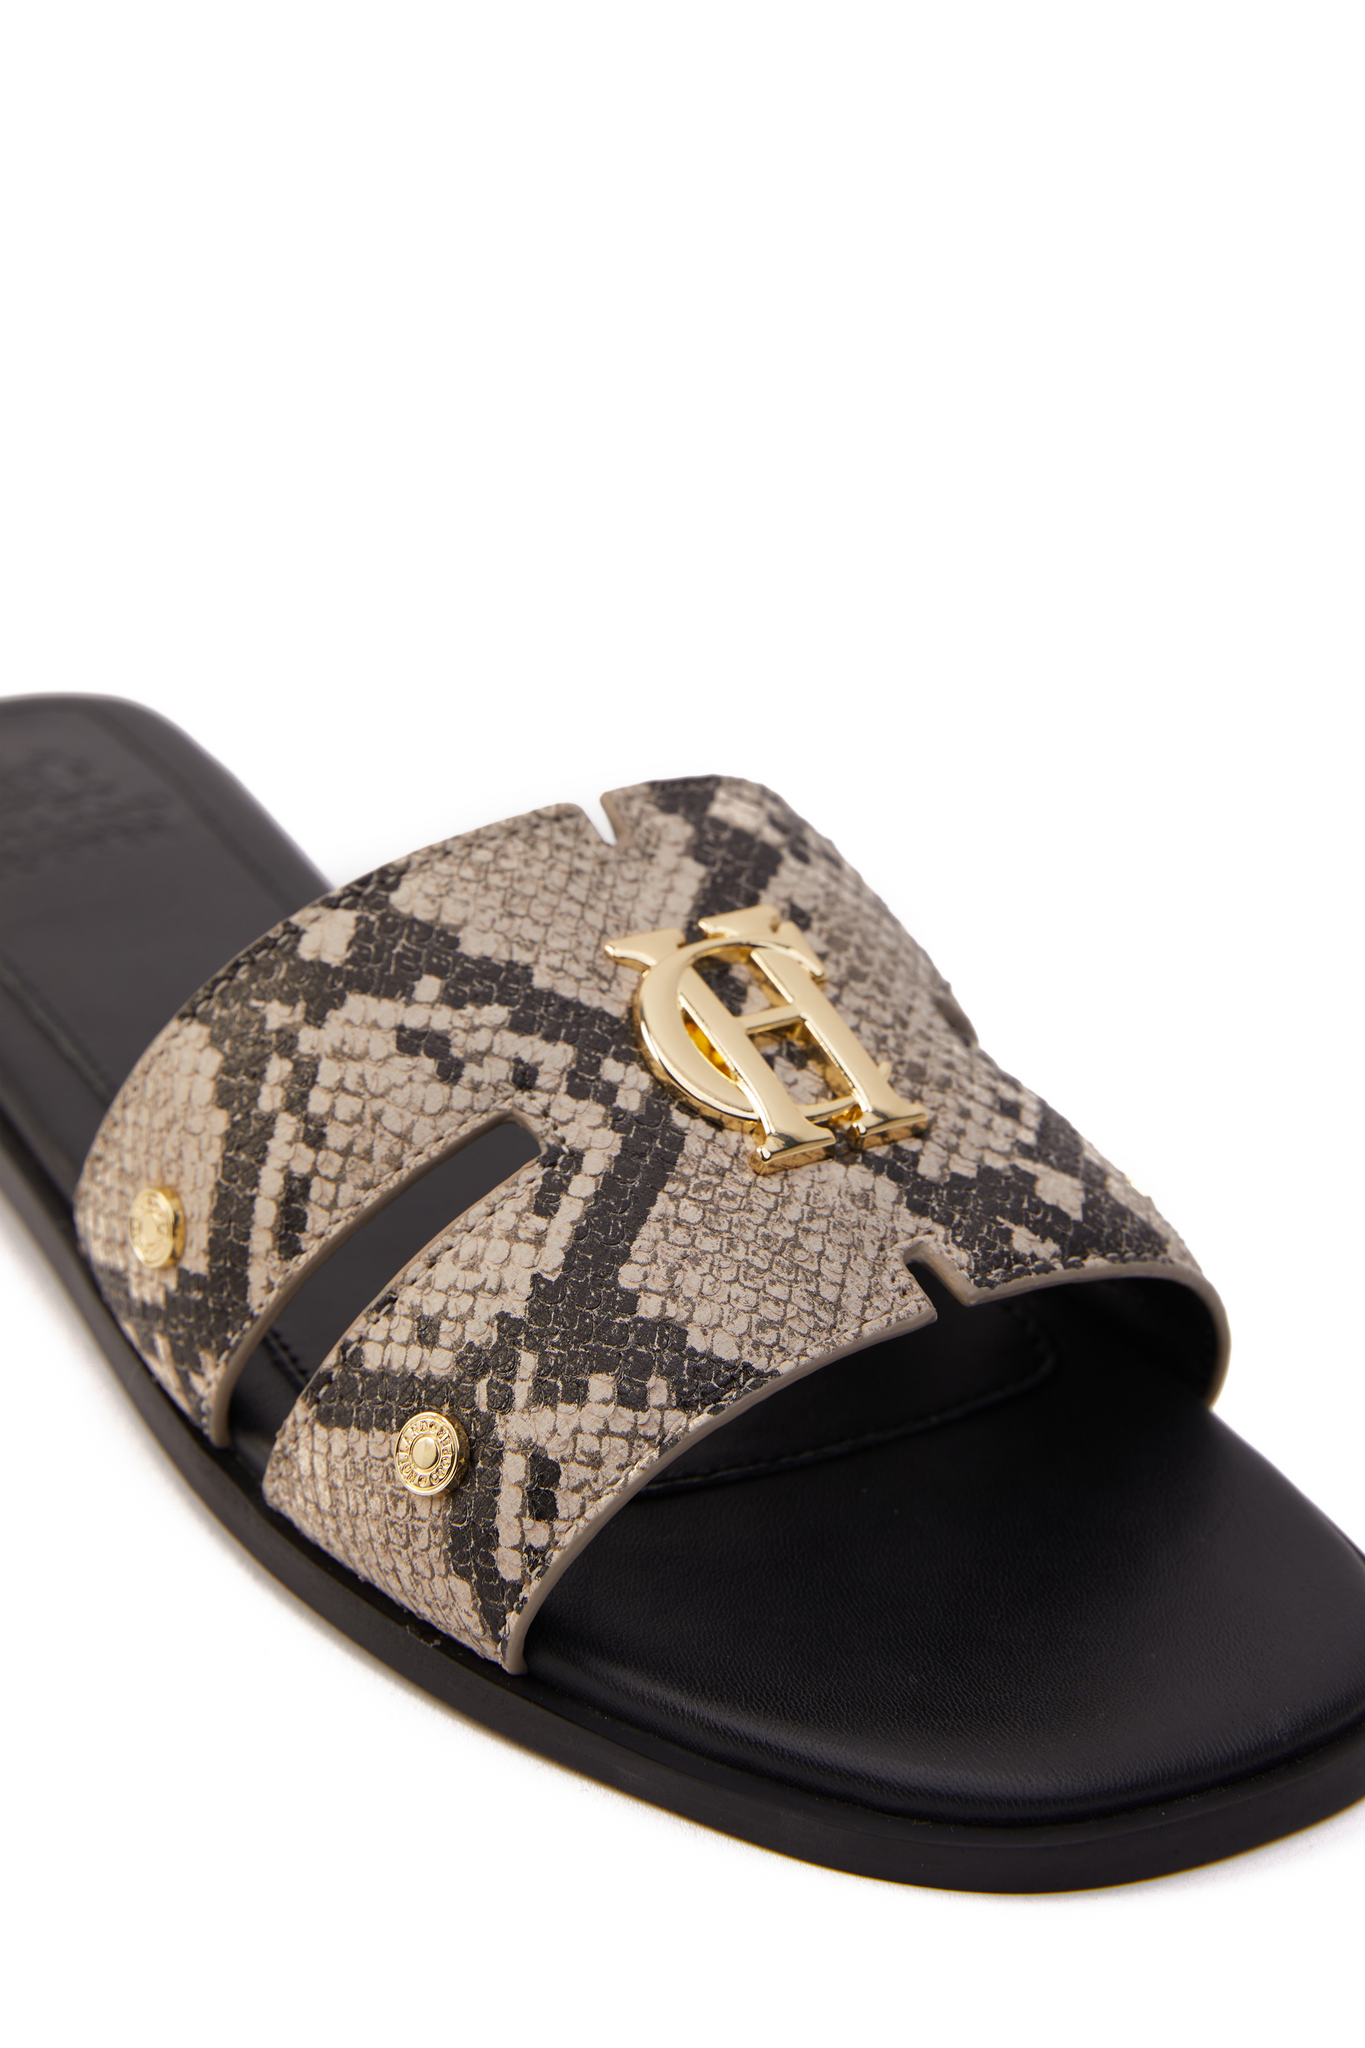 Close up of snake print embossed leather sliders with a black leather sole and gold hardware